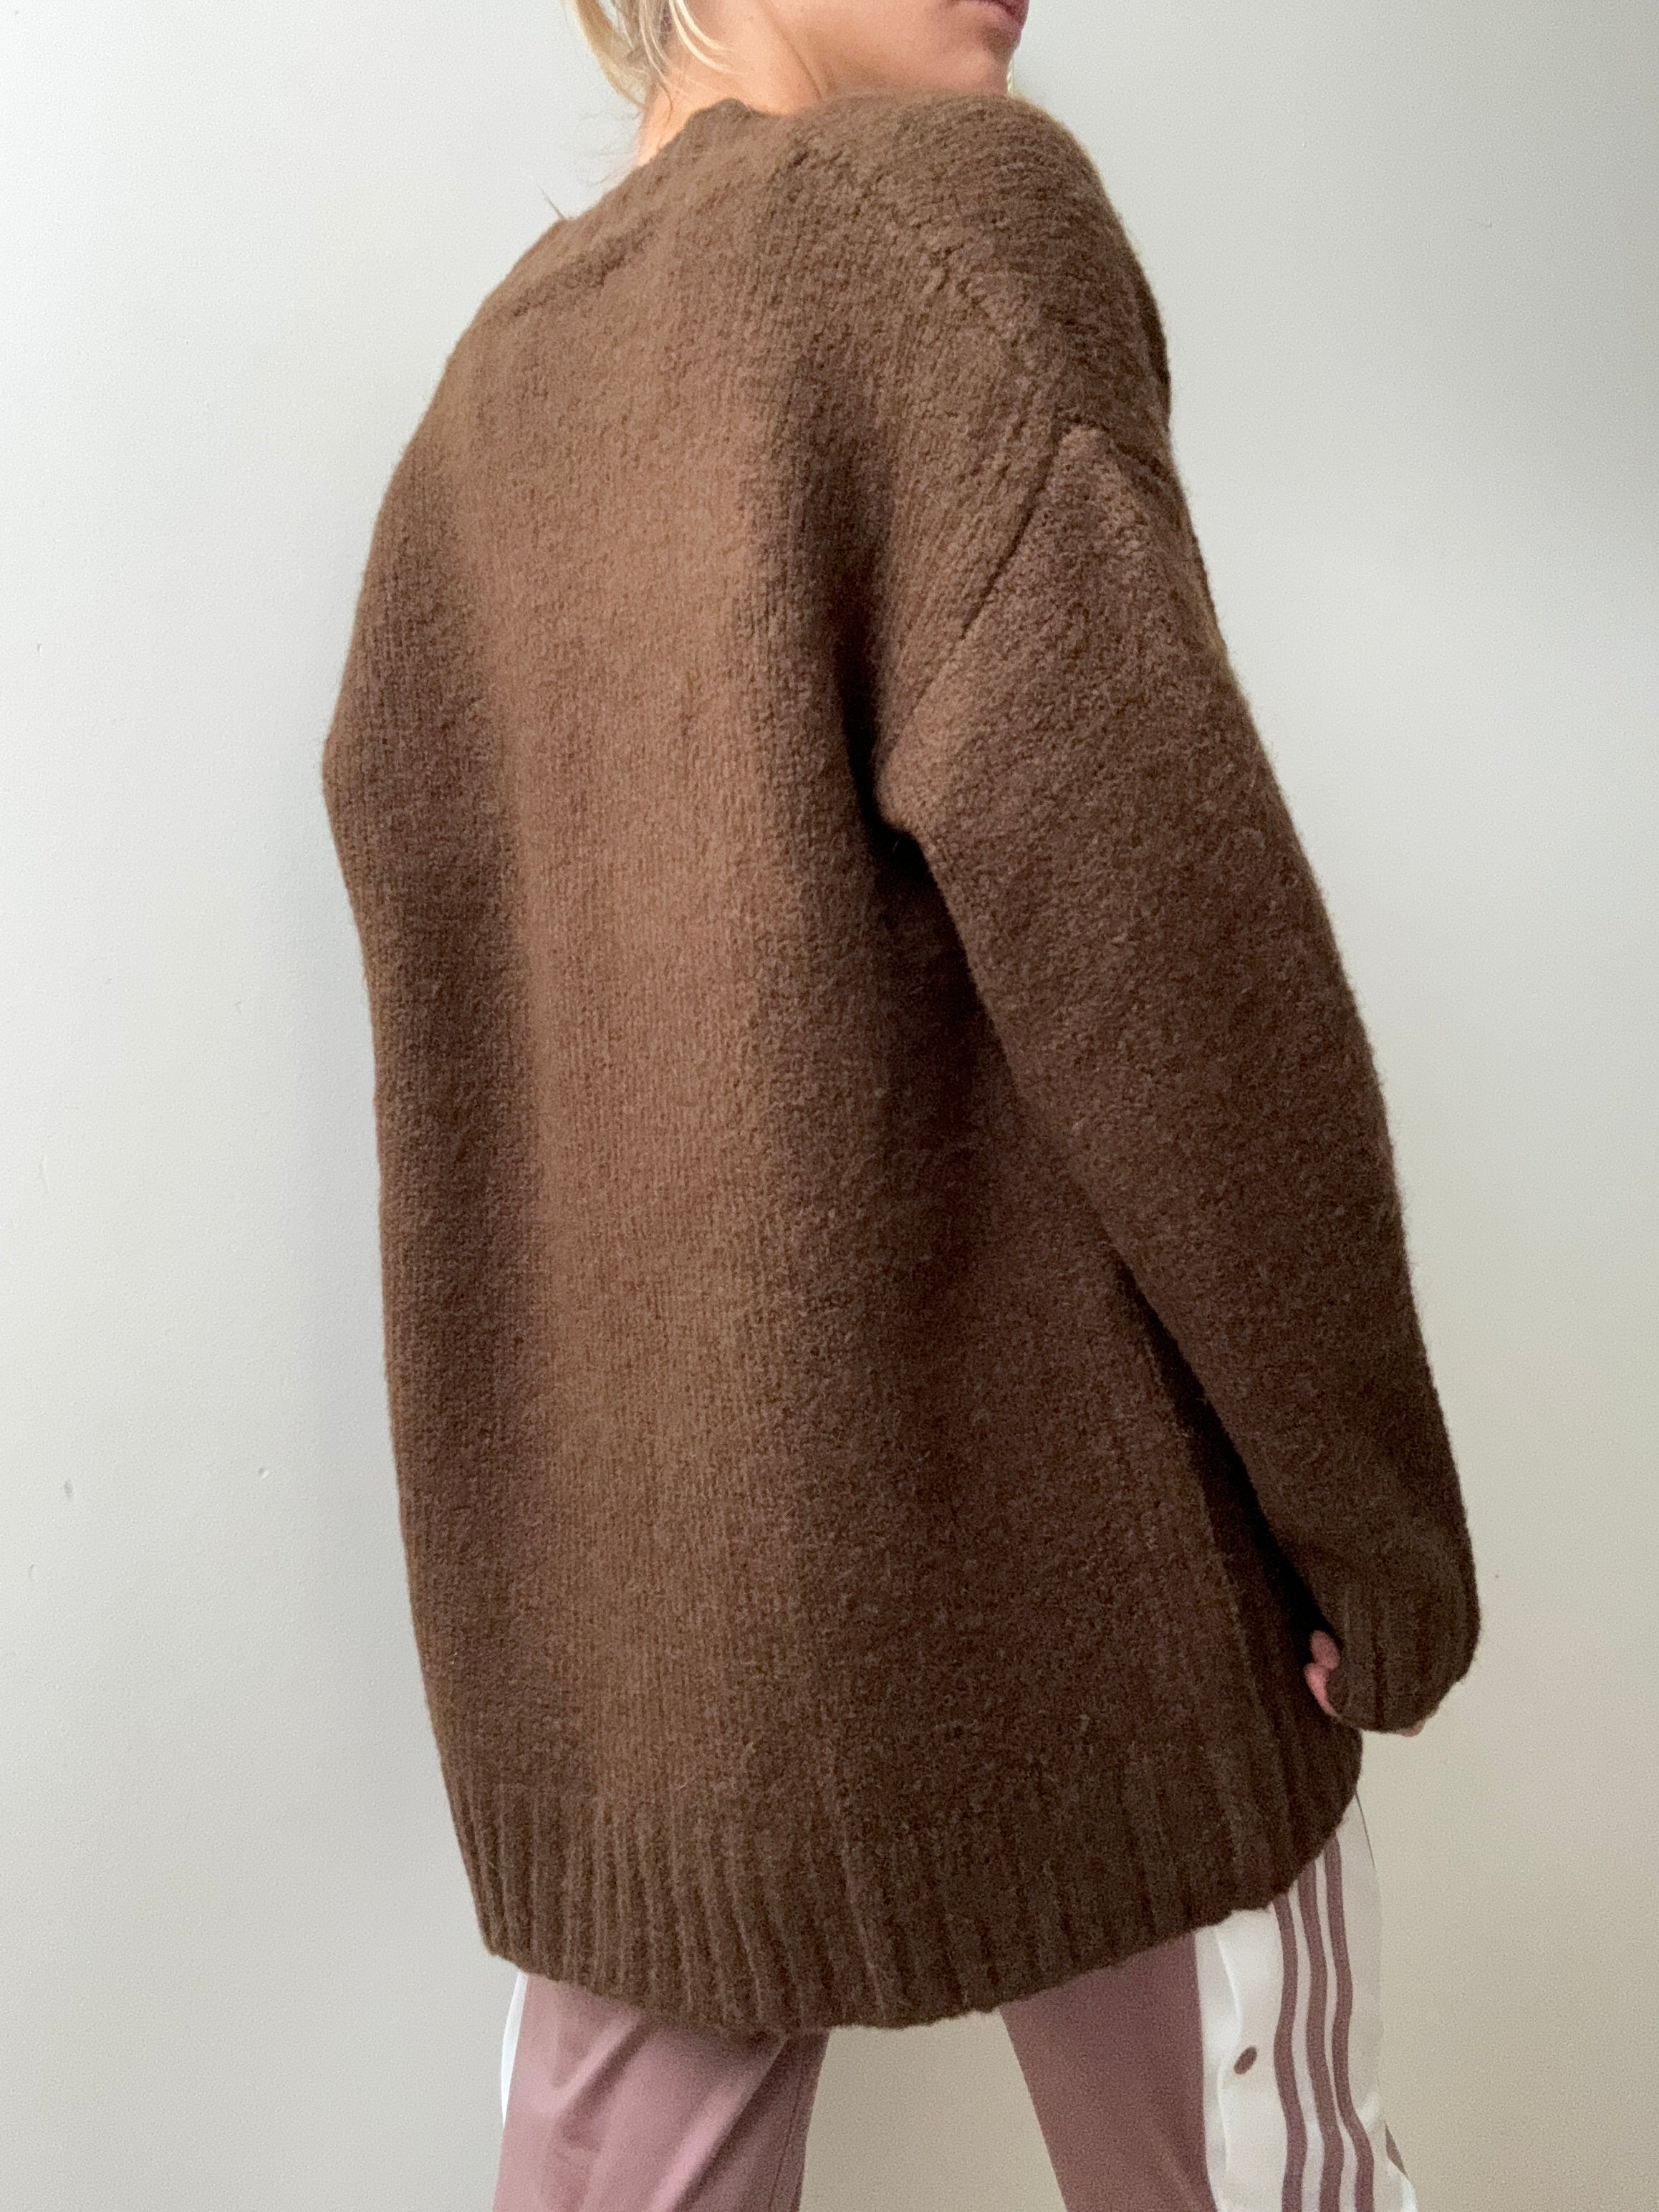 Future Nomads Cardigans One Size In By In Chocolate Knit Cardigan